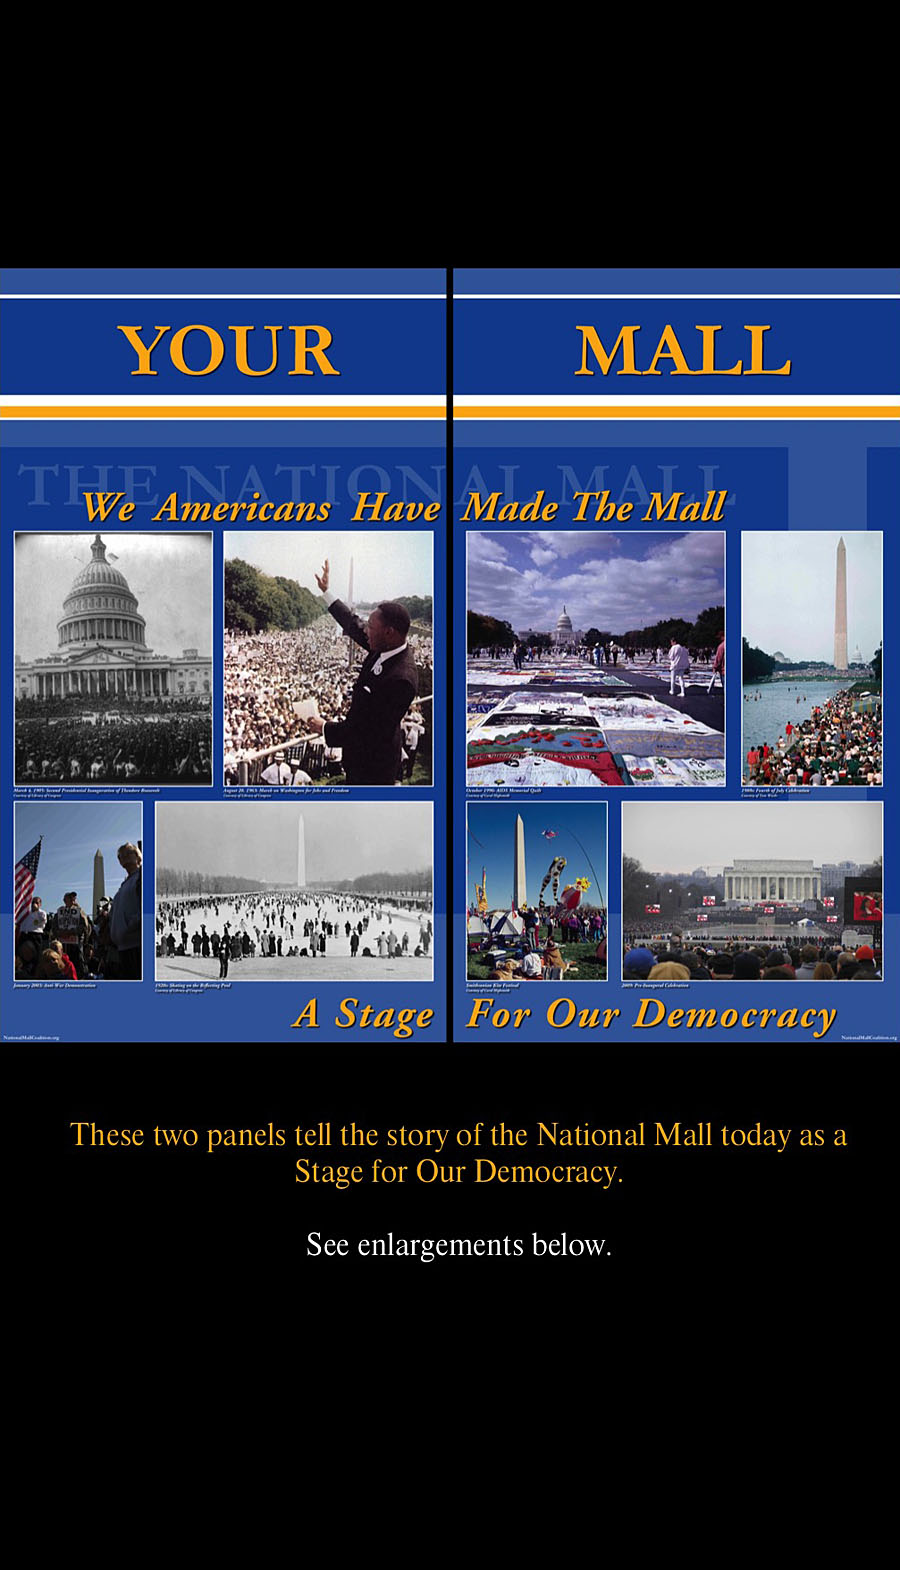 The National Mall: Stage For Democracy Exhibit at Reagan National Airport: These two panels tell the story ...